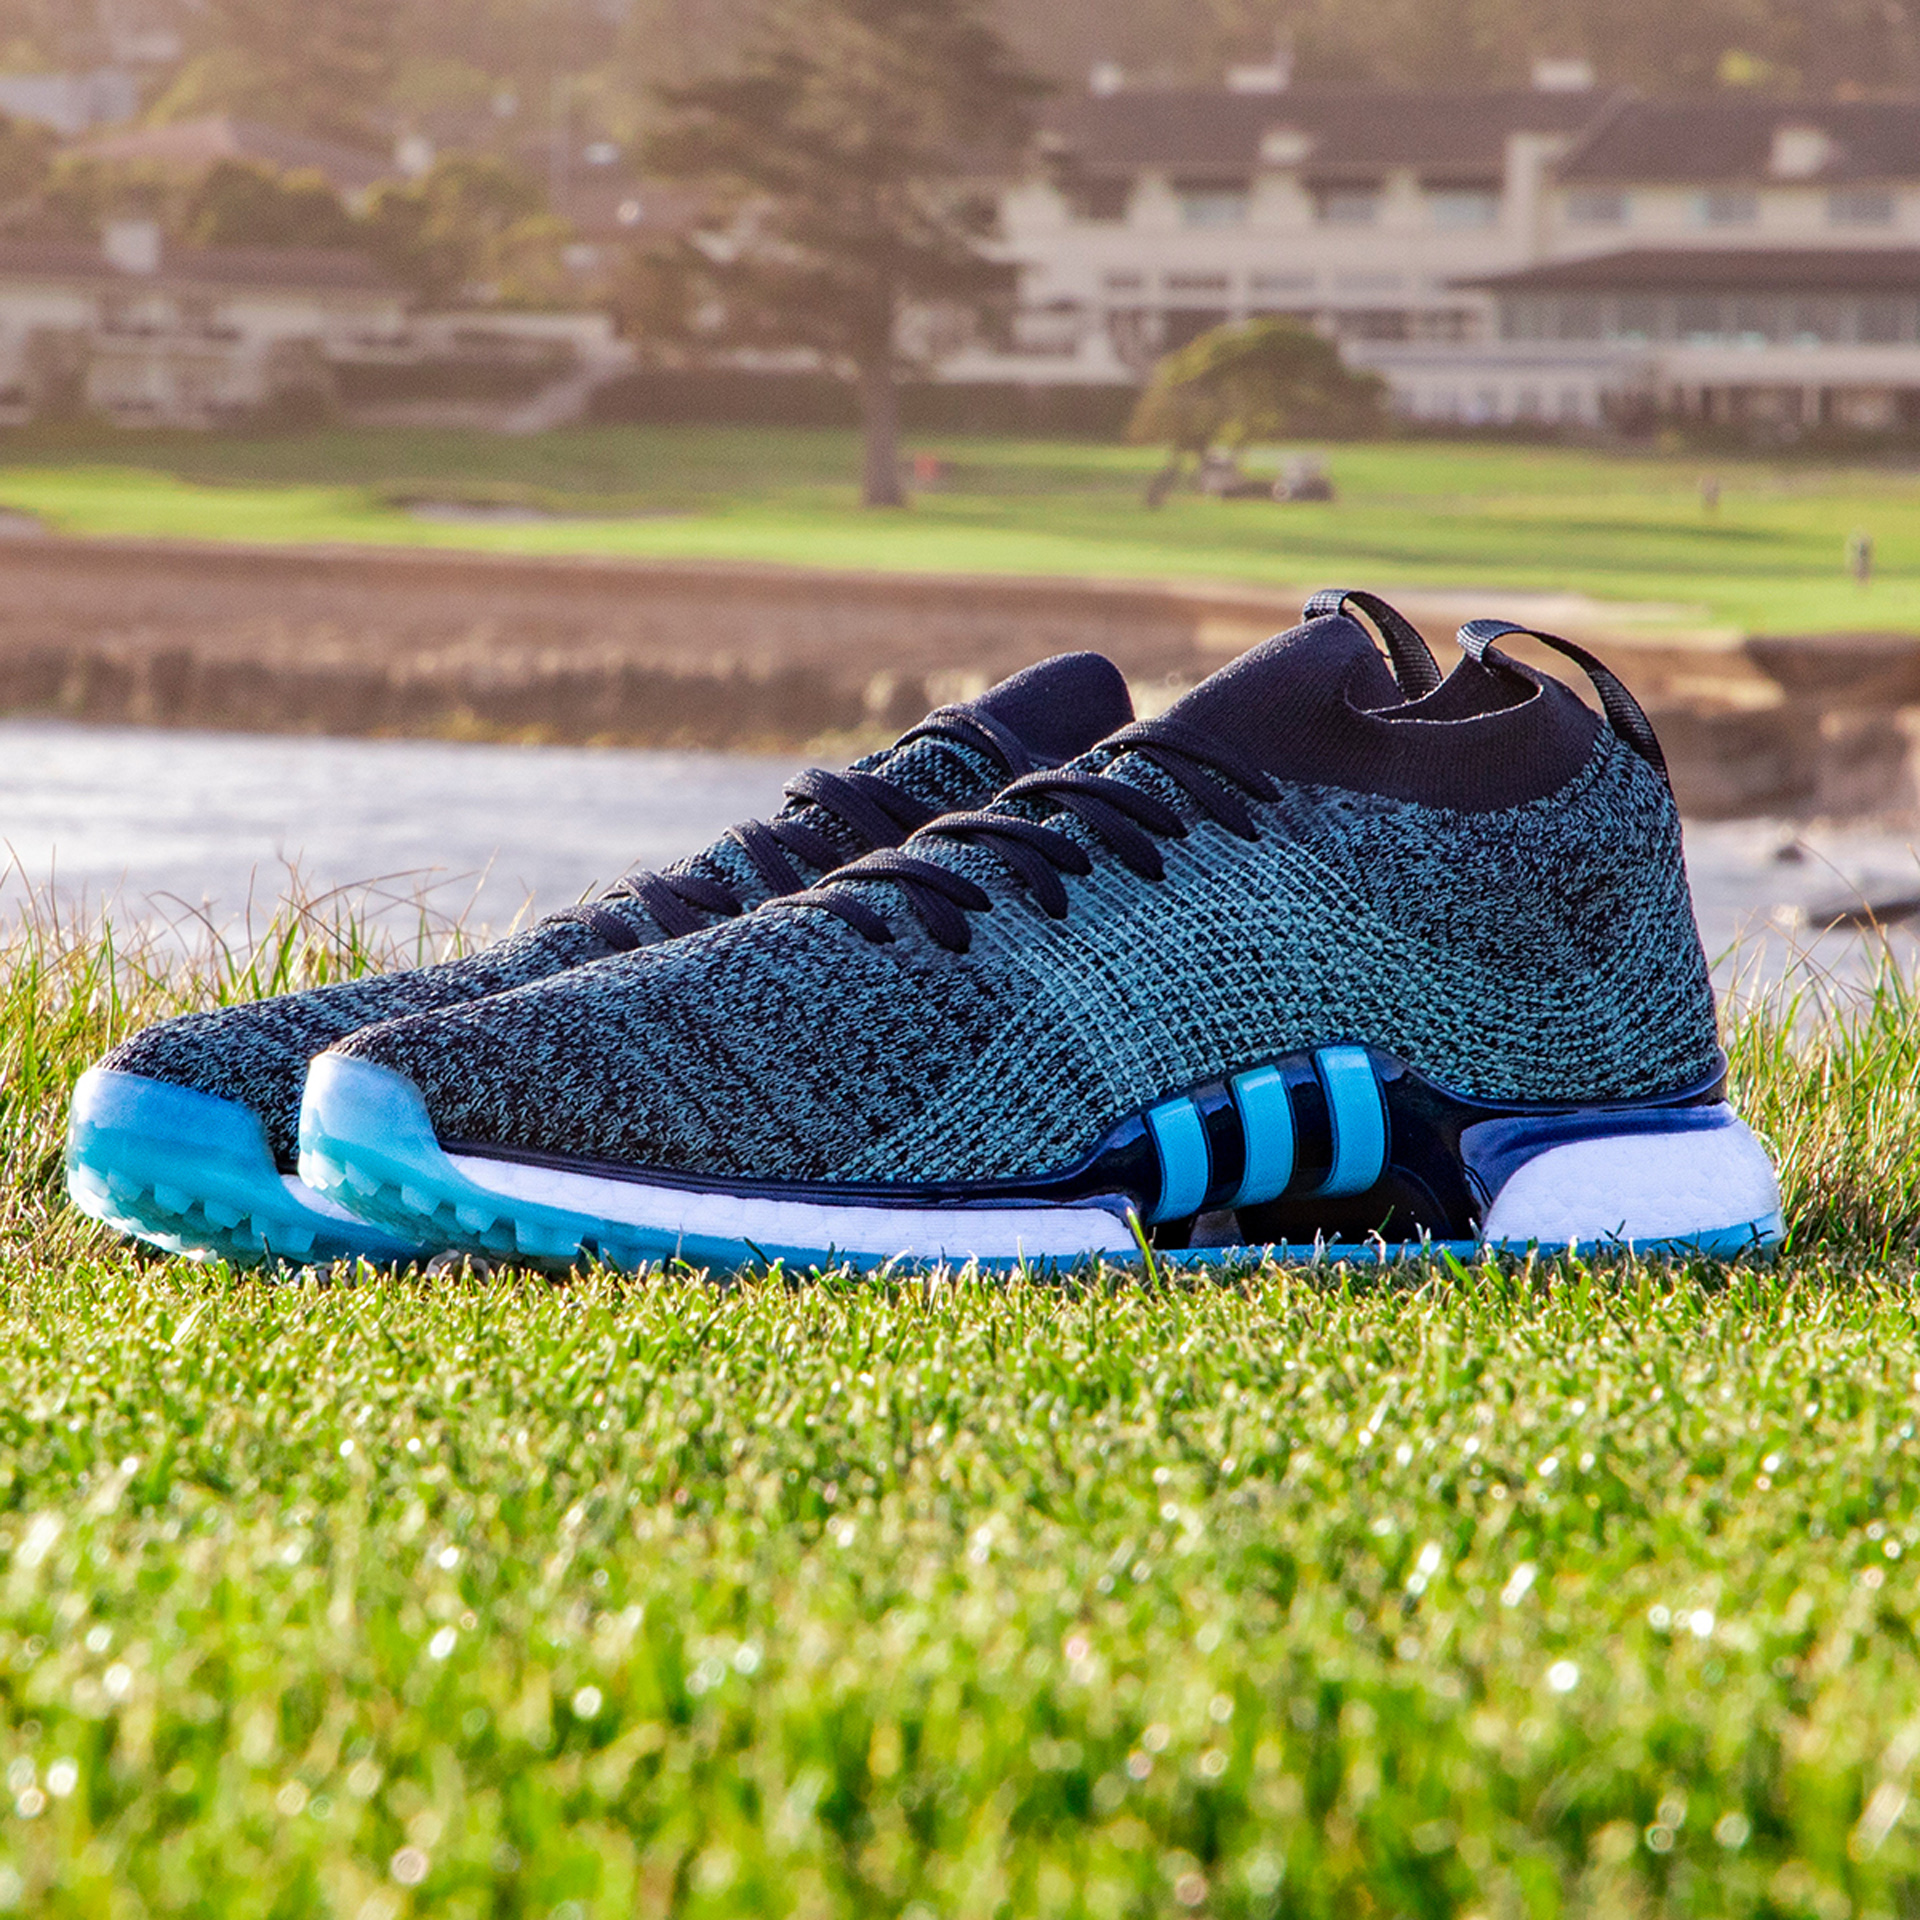 Adidas' new TOUR360 XT golf are made with recycled plastic waste | Golf Clubs, Balls, Bags | Golf